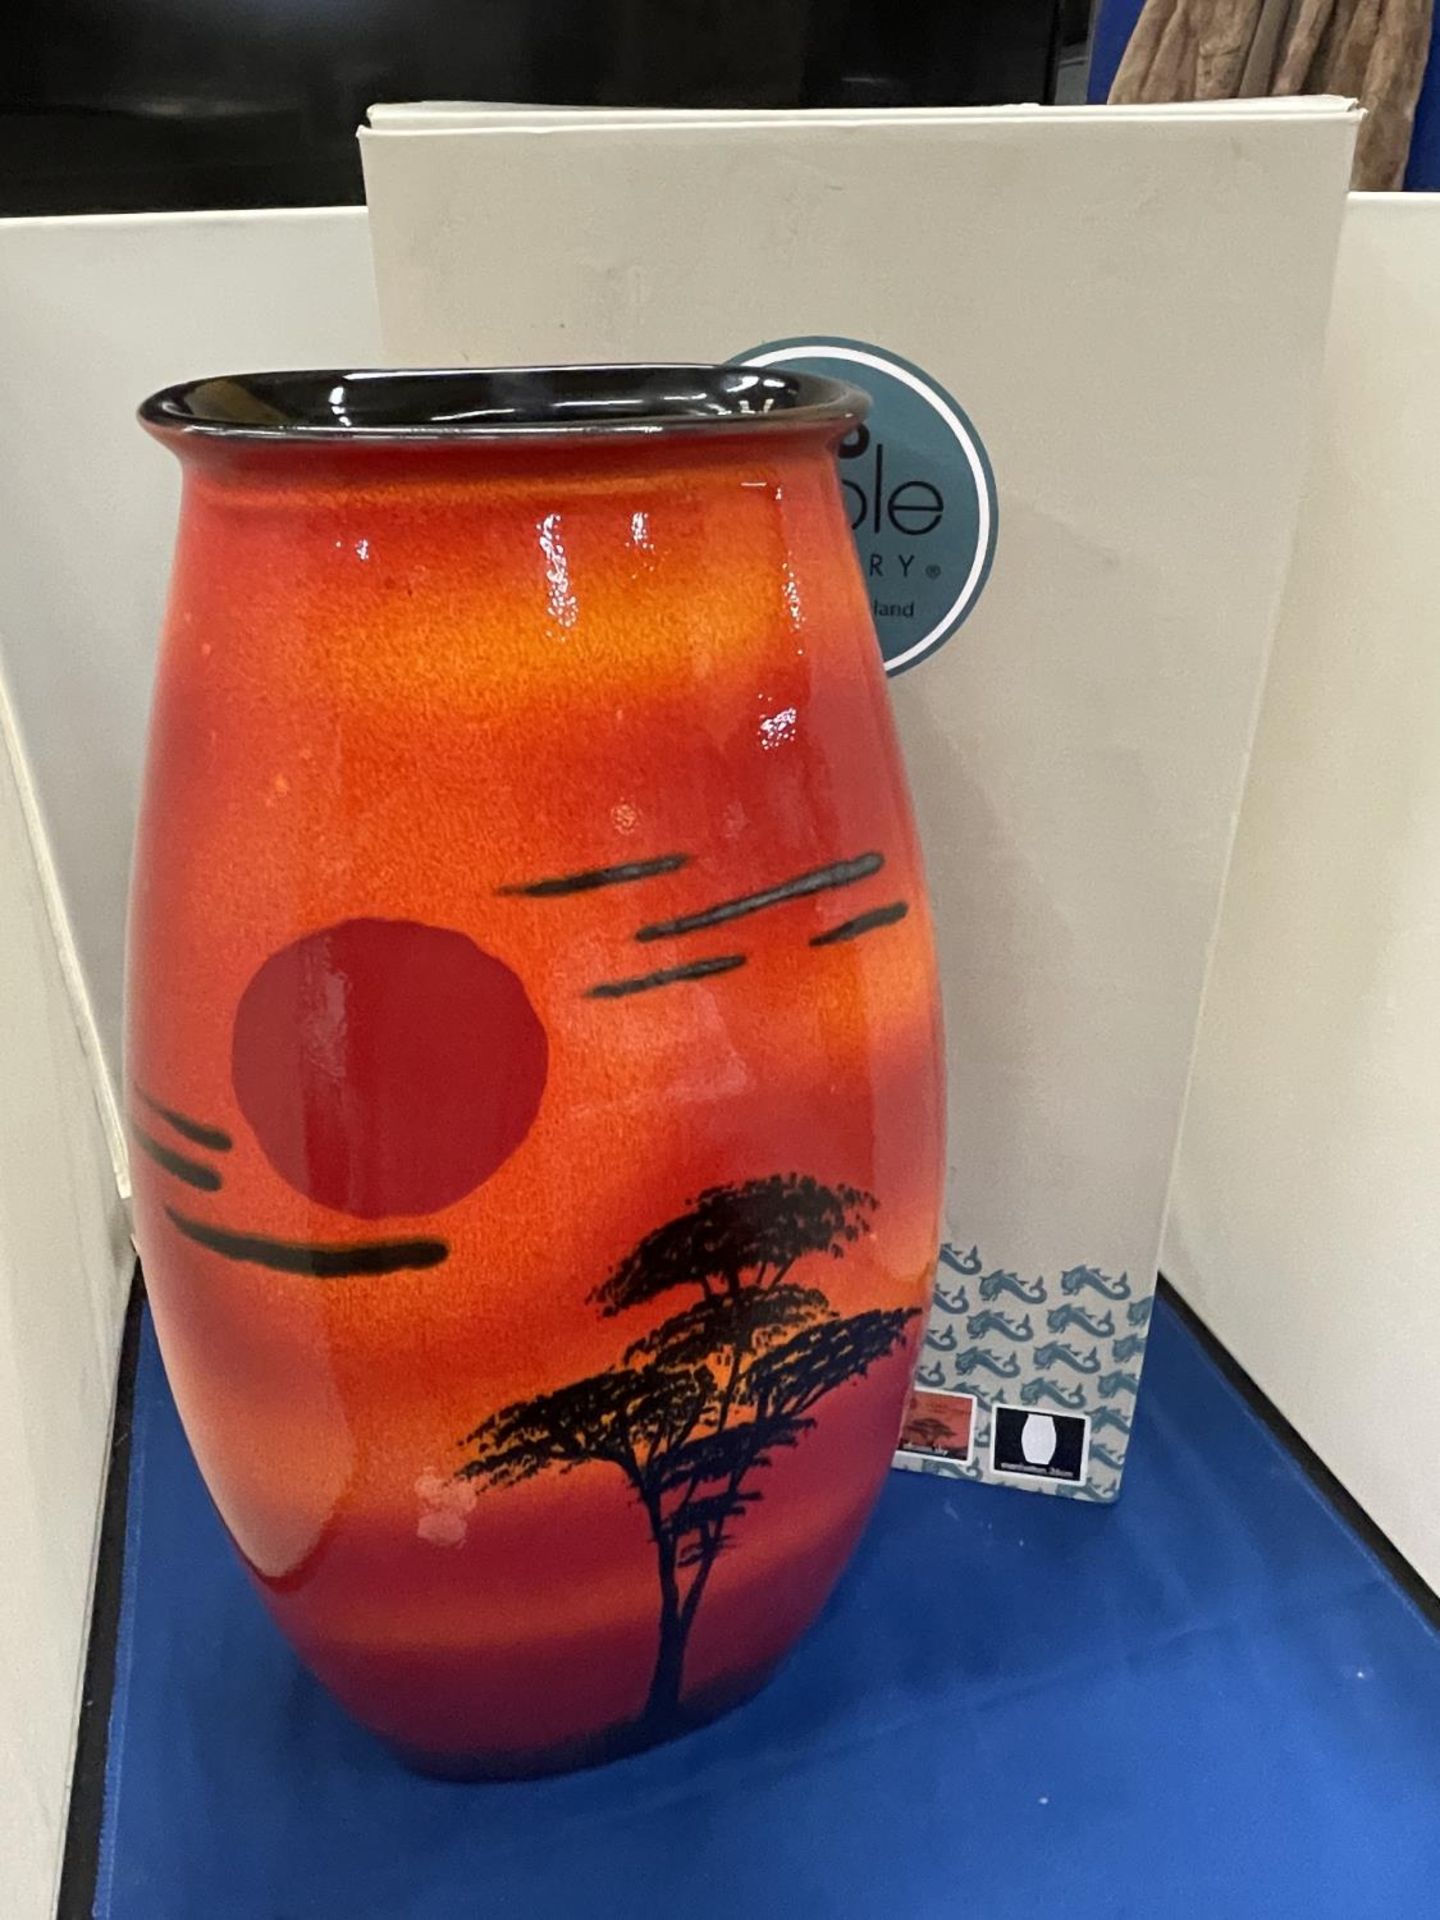 A POOLE POTTERY MANHATTON VASE WITH AFRICAN SKY DESIGN 36CM TALL WITH ORIGINAL BOX - Image 2 of 10